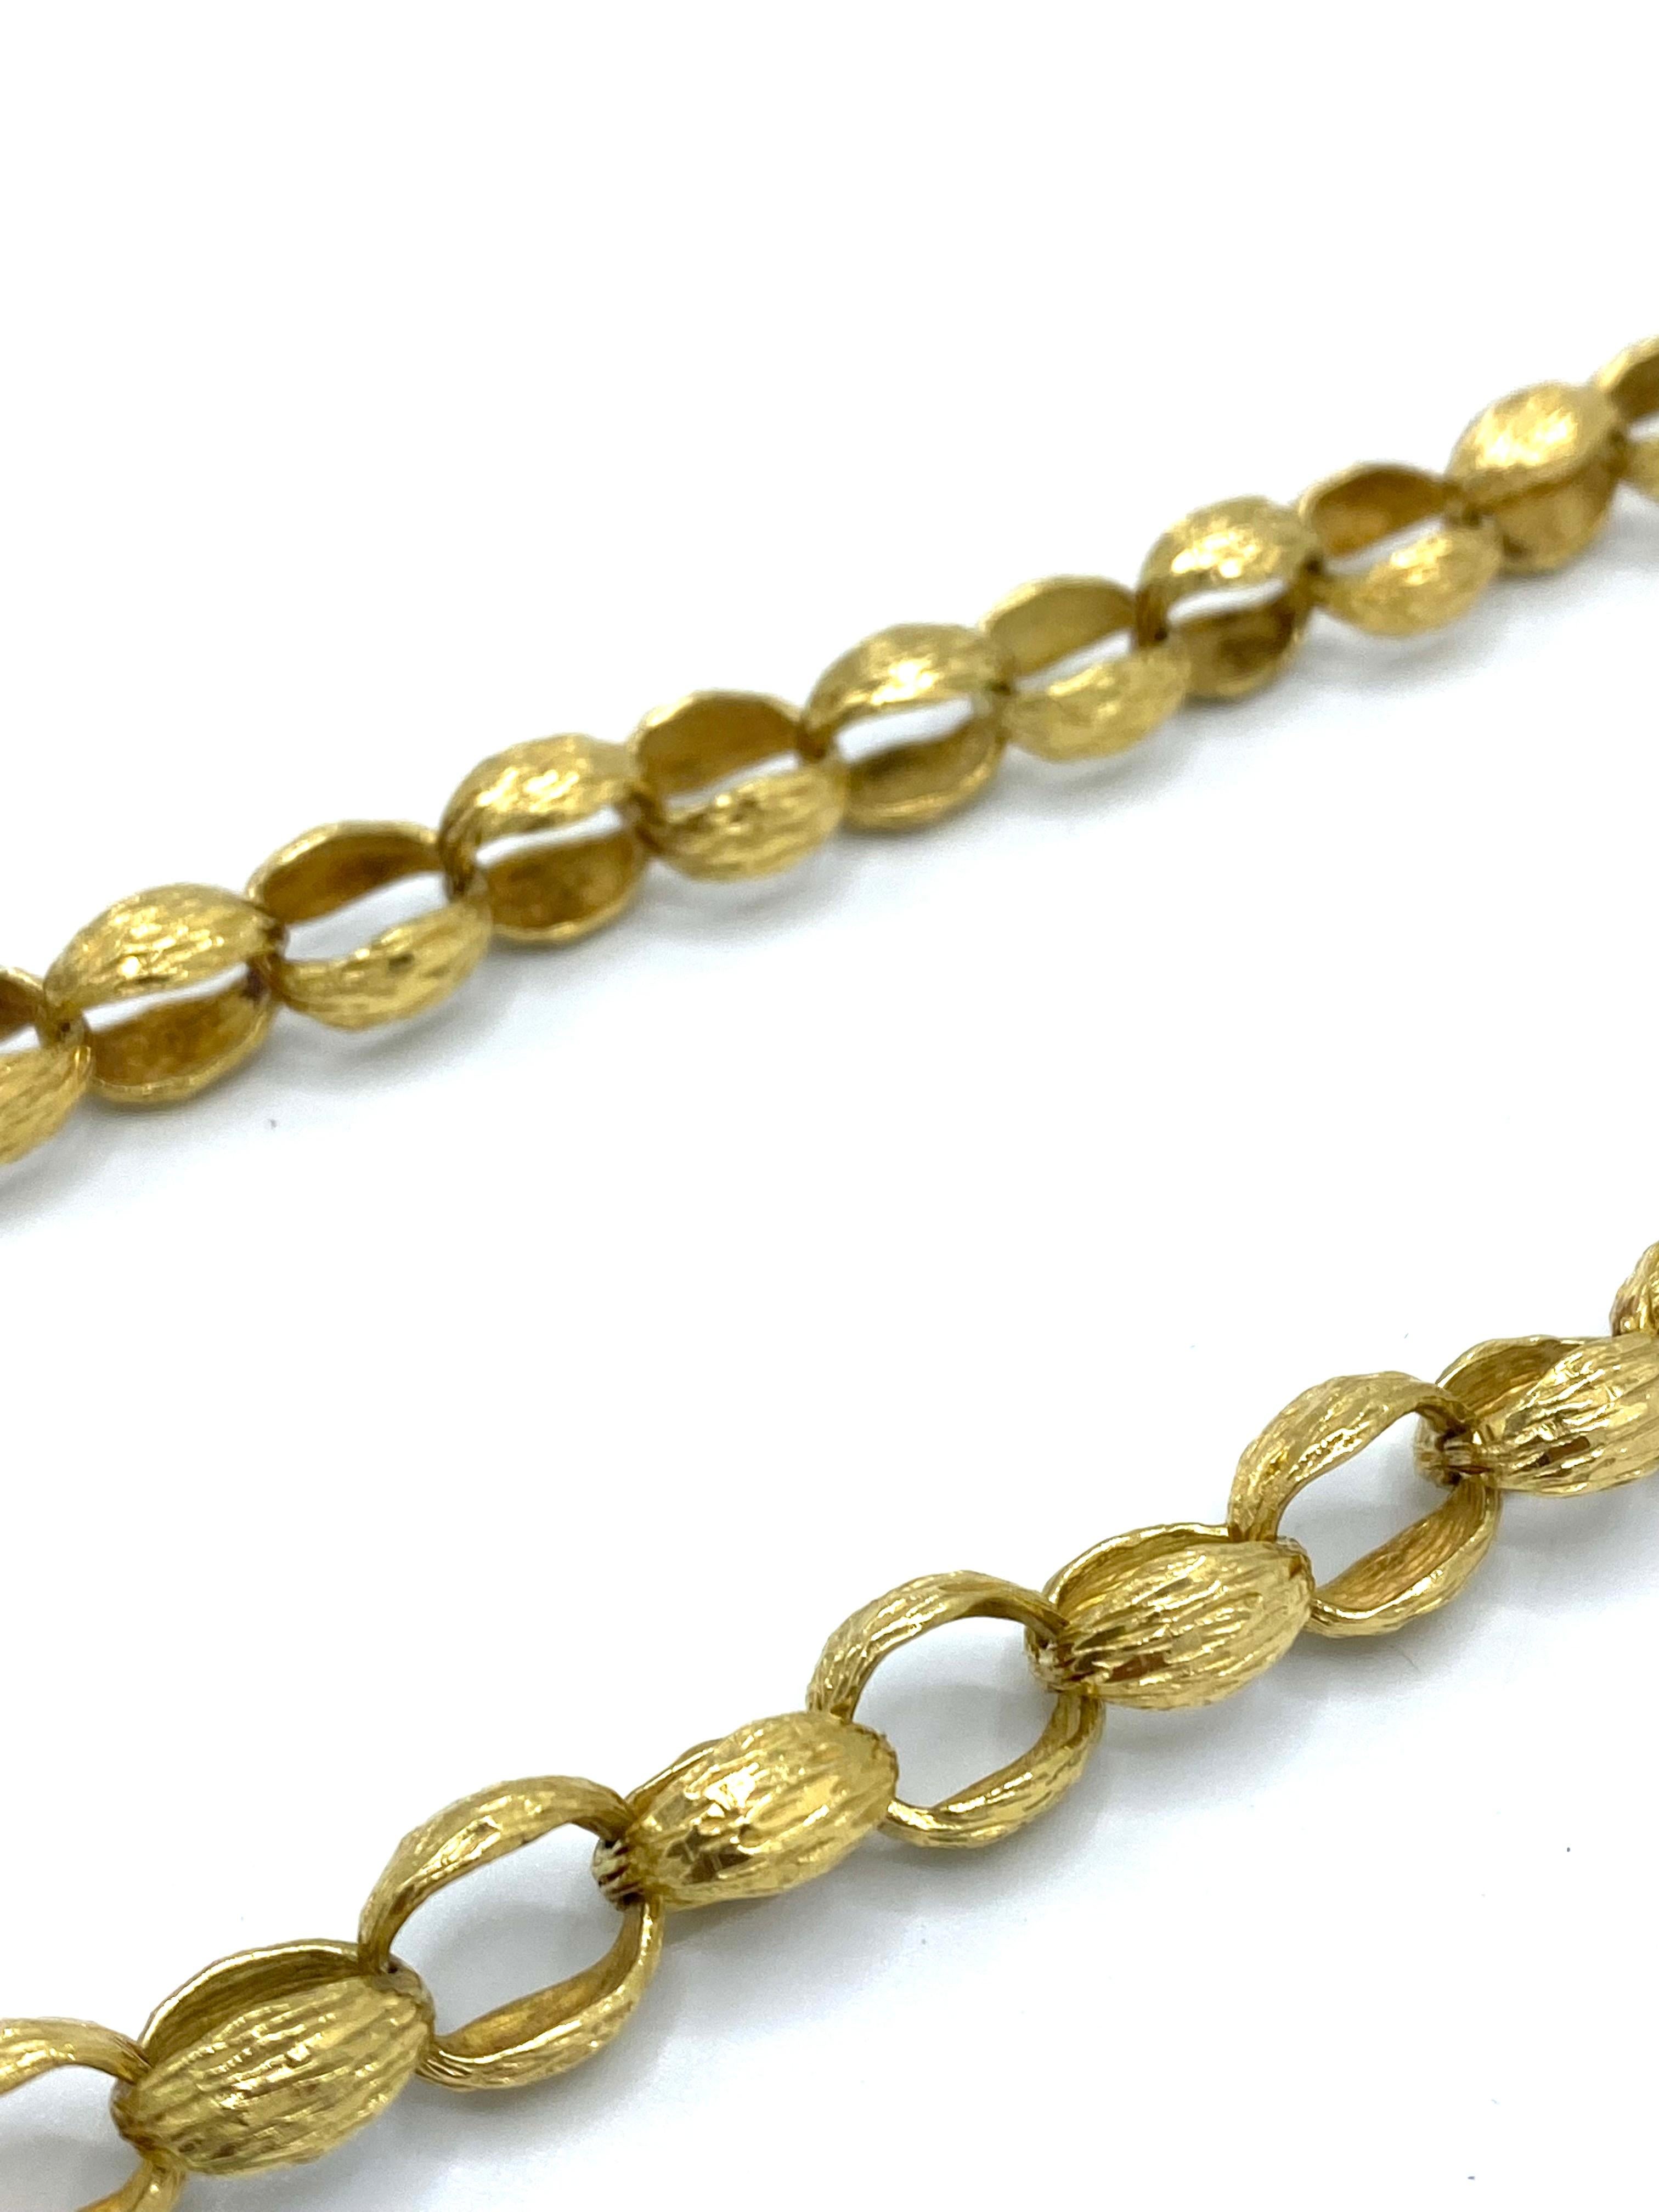 Product details:

The necklace and the brooch made out of 18 karat yellow gold, featuring textured finish and floral motif.

The necklace is 34 inches long and 5/16 inches wide. The weight is 113.2 grams.
The pendant is 2- 11/16 inches long and